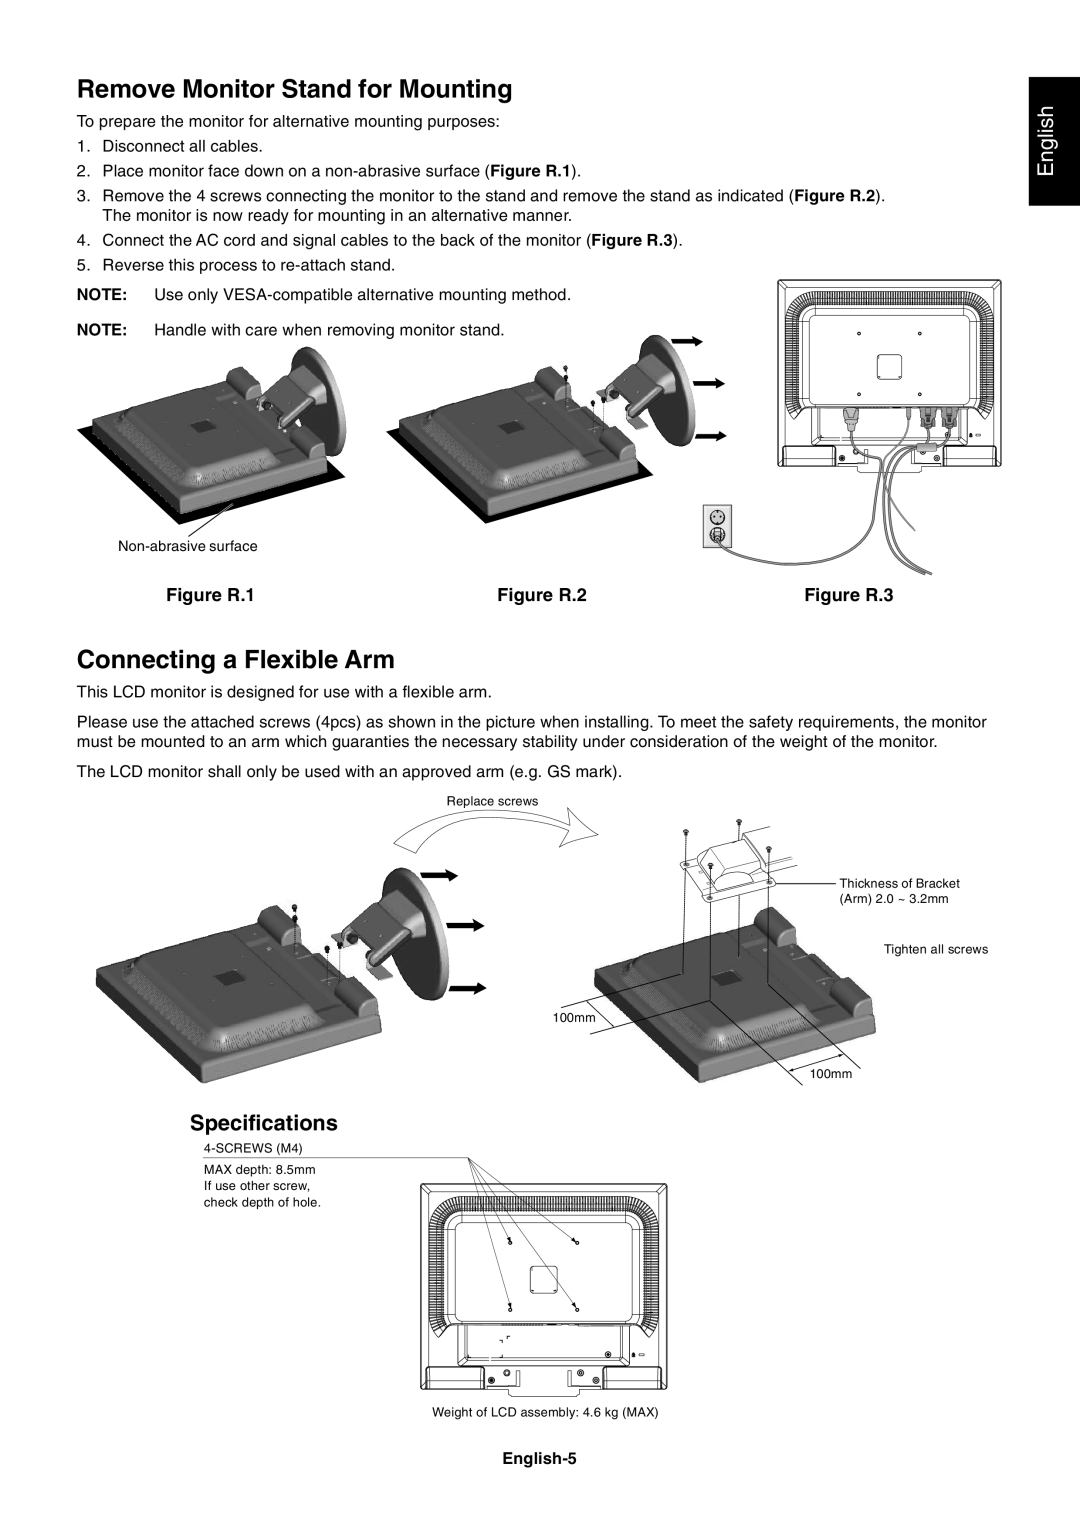 NEC LCD1970NX Remove Monitor Stand for Mounting, Connecting a Flexible Arm, English, Figure R.1, Figure R.2, Figure R.3 